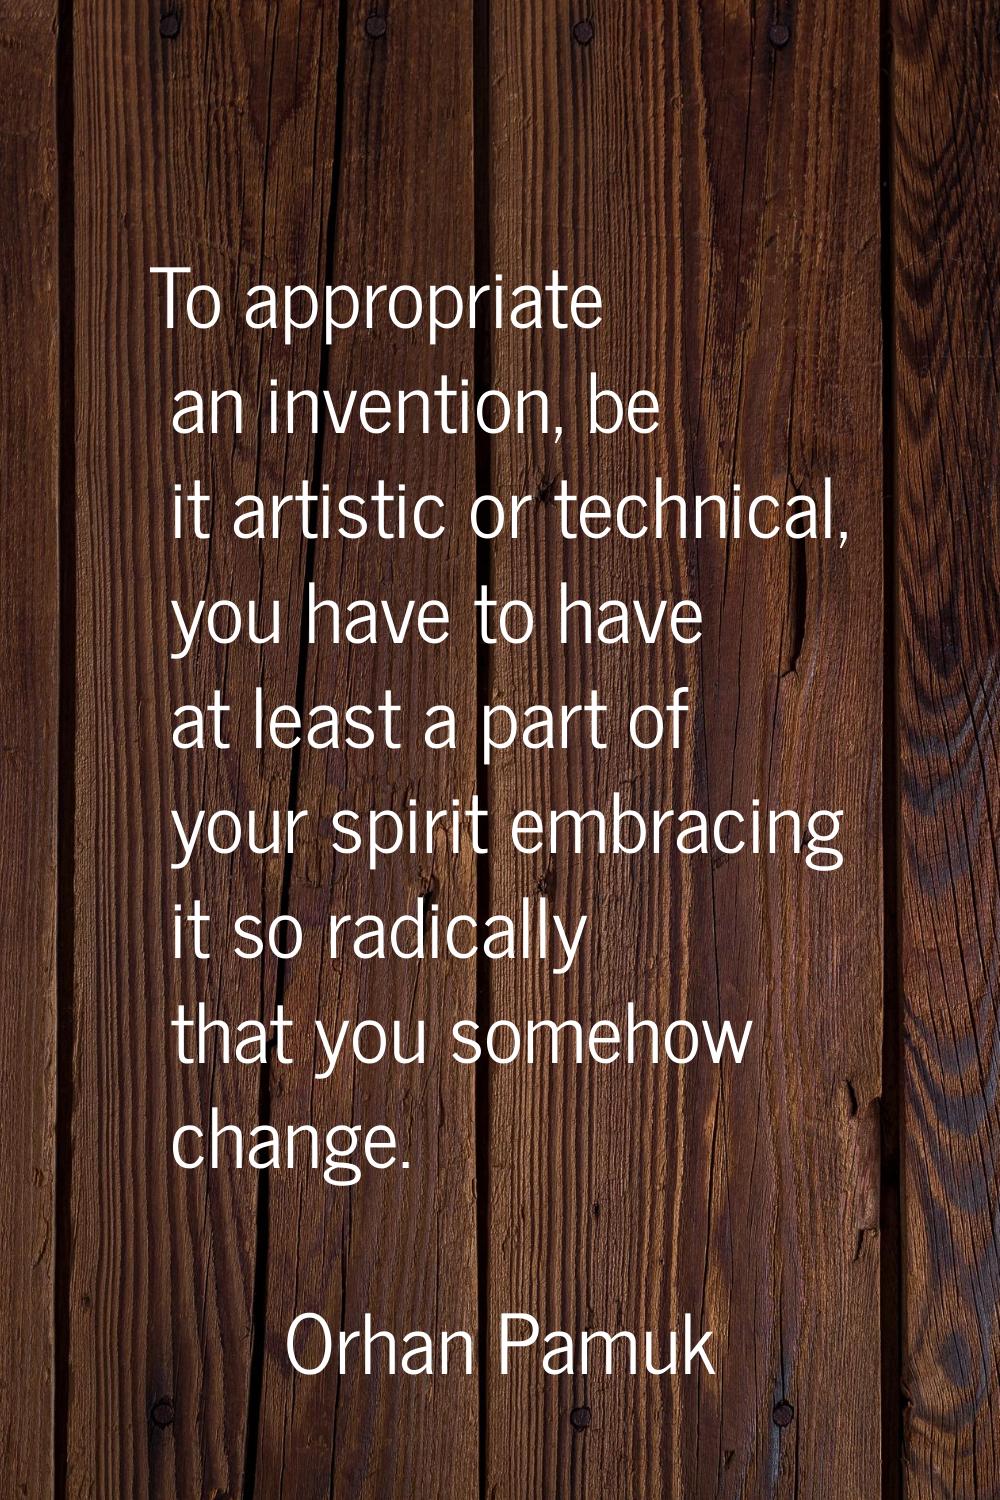 To appropriate an invention, be it artistic or technical, you have to have at least a part of your 